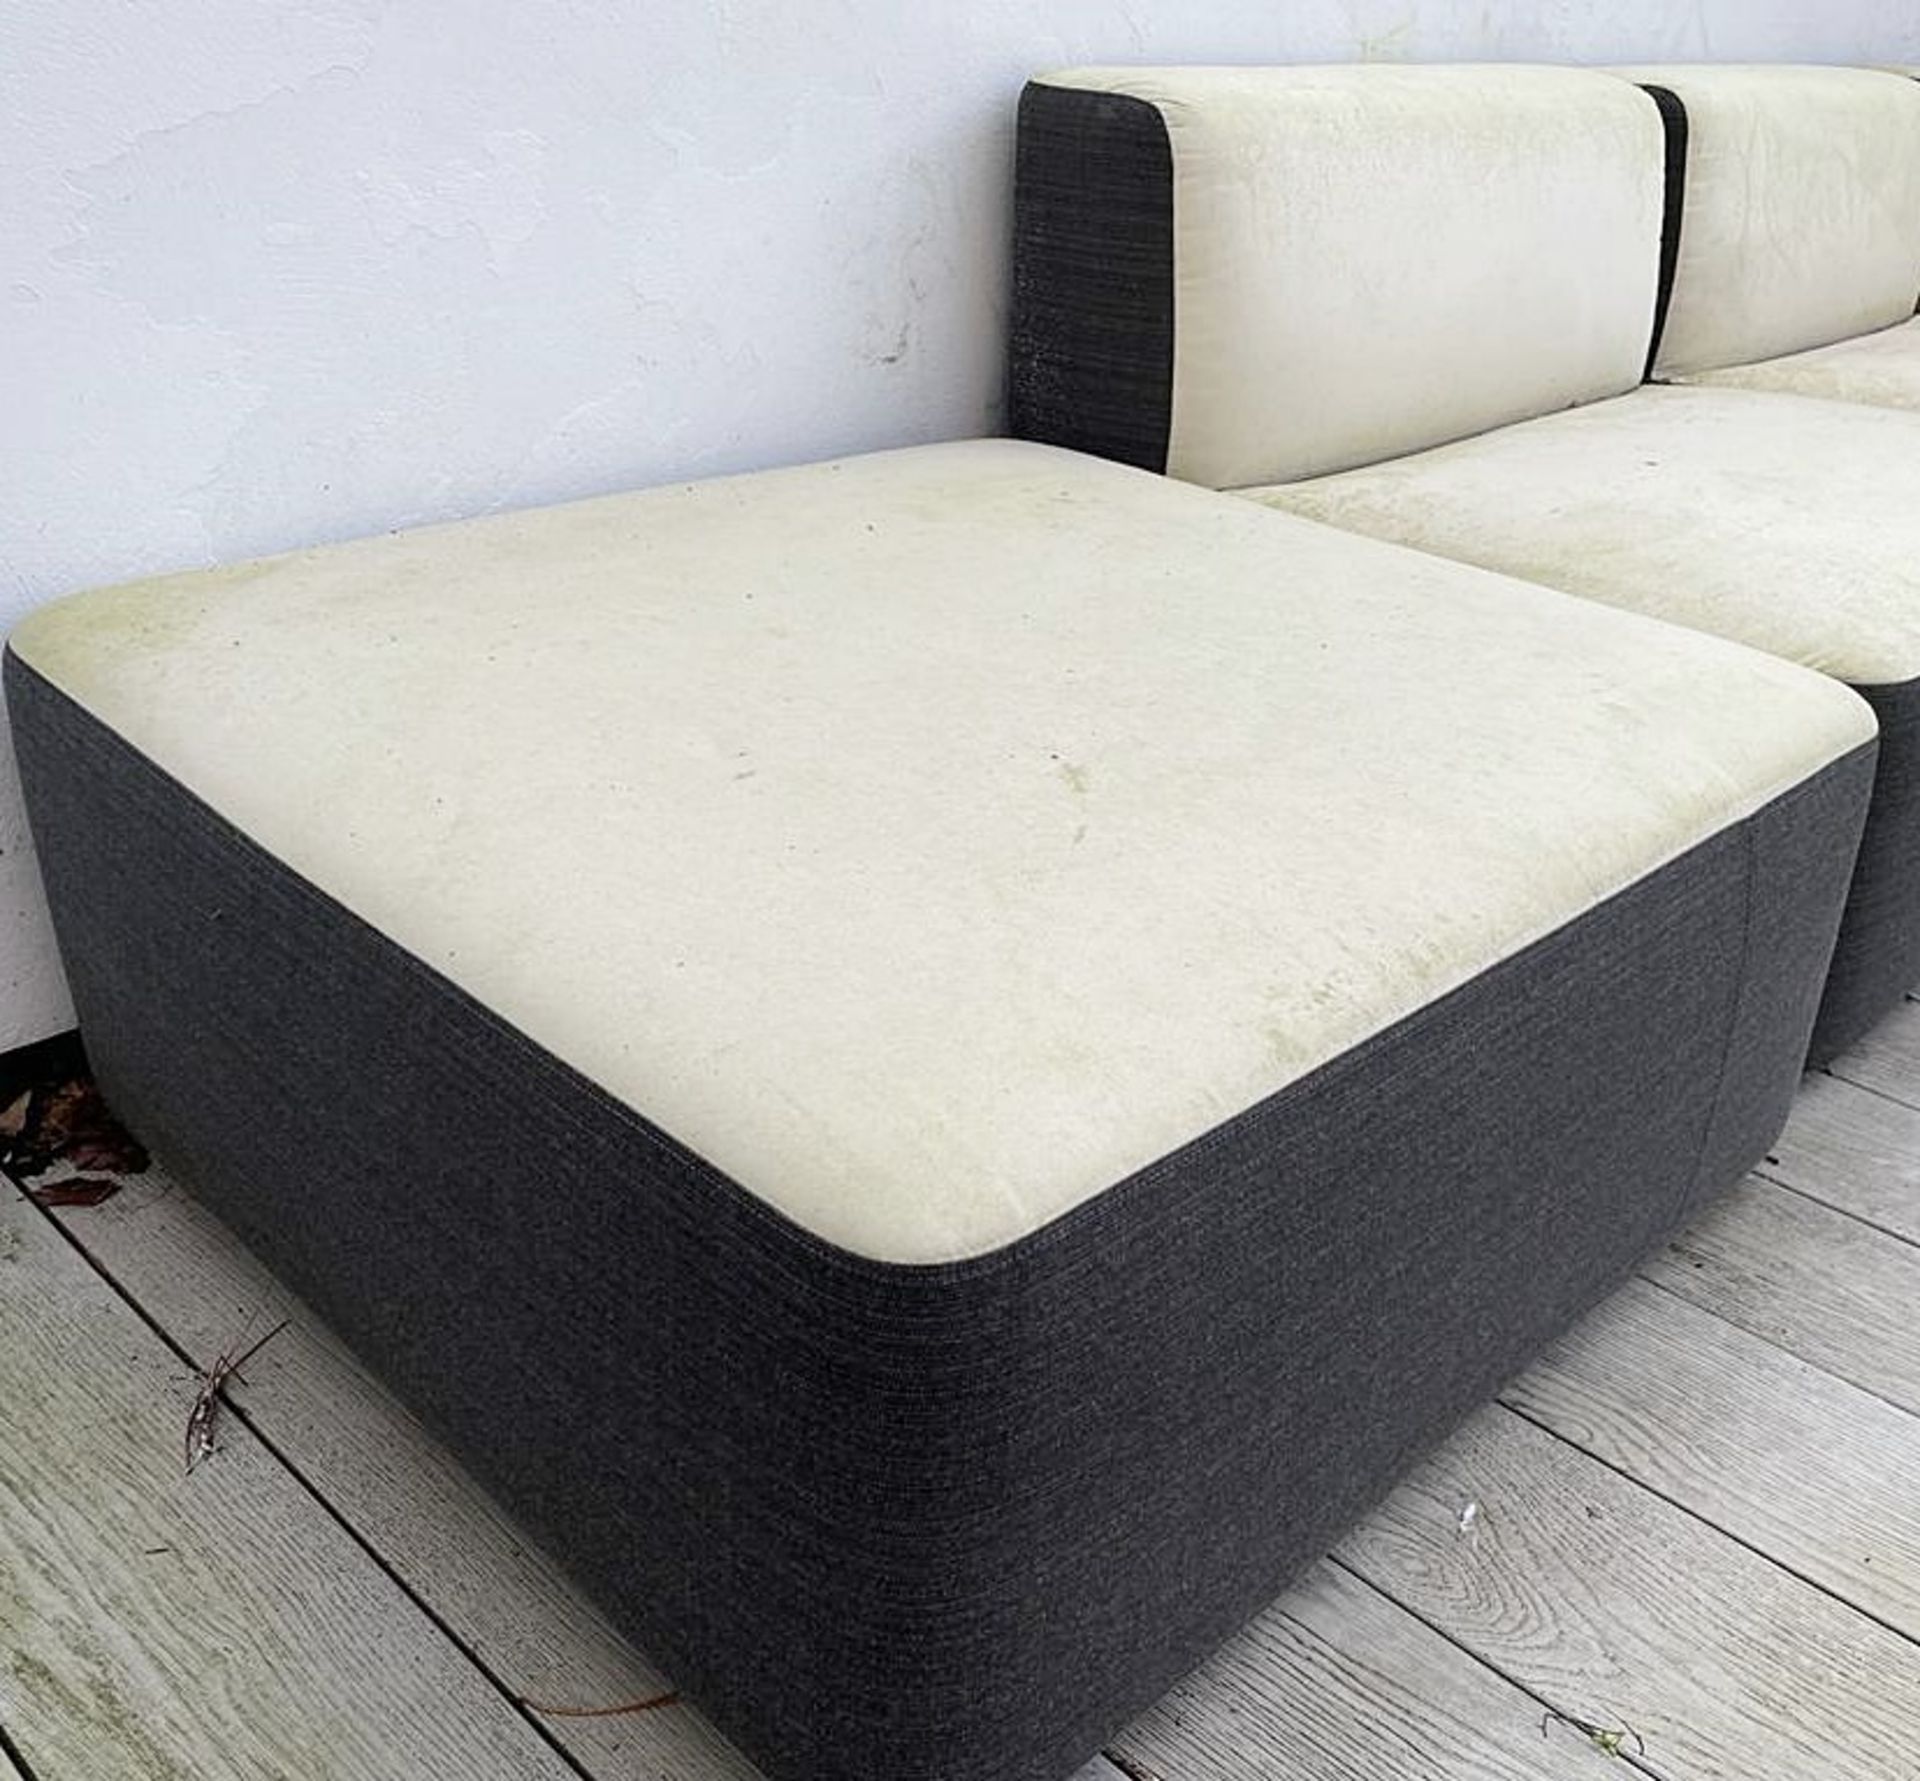 Large 7-Section VARASCHIN Modular Outdoor Corner Sofa Seating - Dimensions To Follow - From an - Image 2 of 12